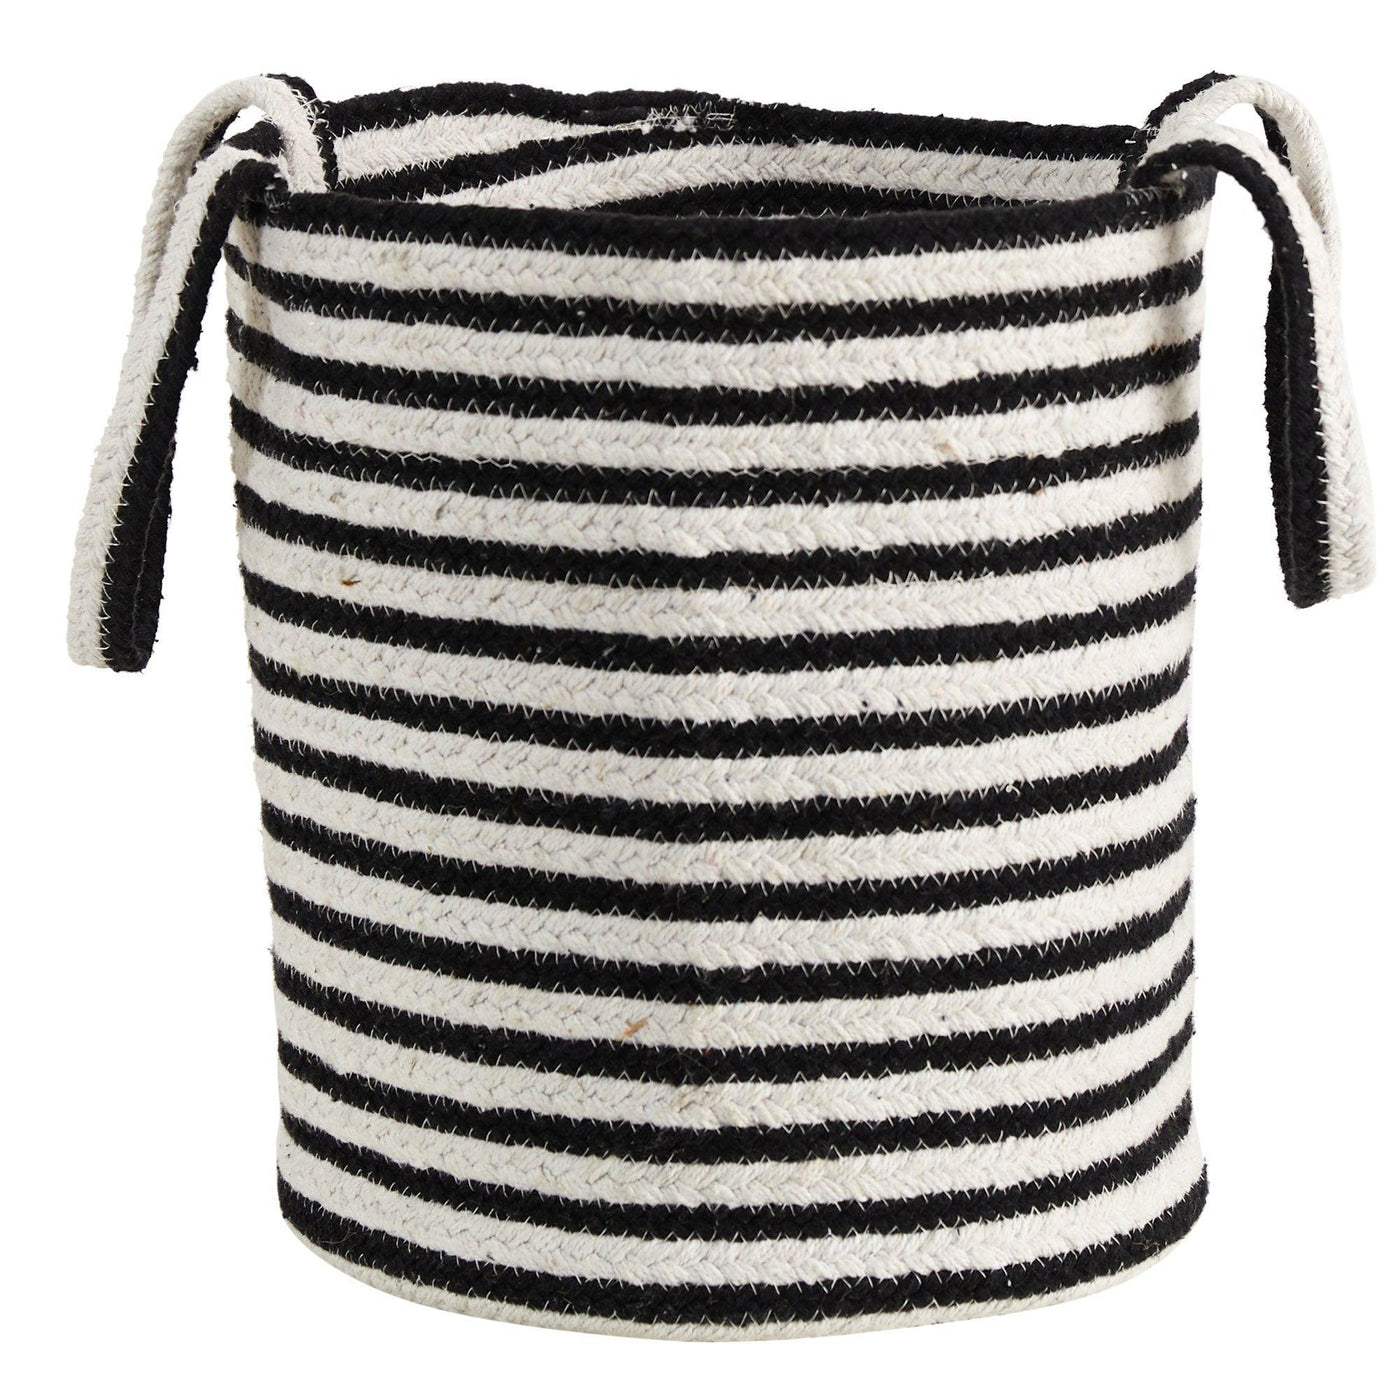 13” Boho Chic Basket Natural Cotton, Handwoven Black and White Stripe with Handles by Nearly Natural - Vysn